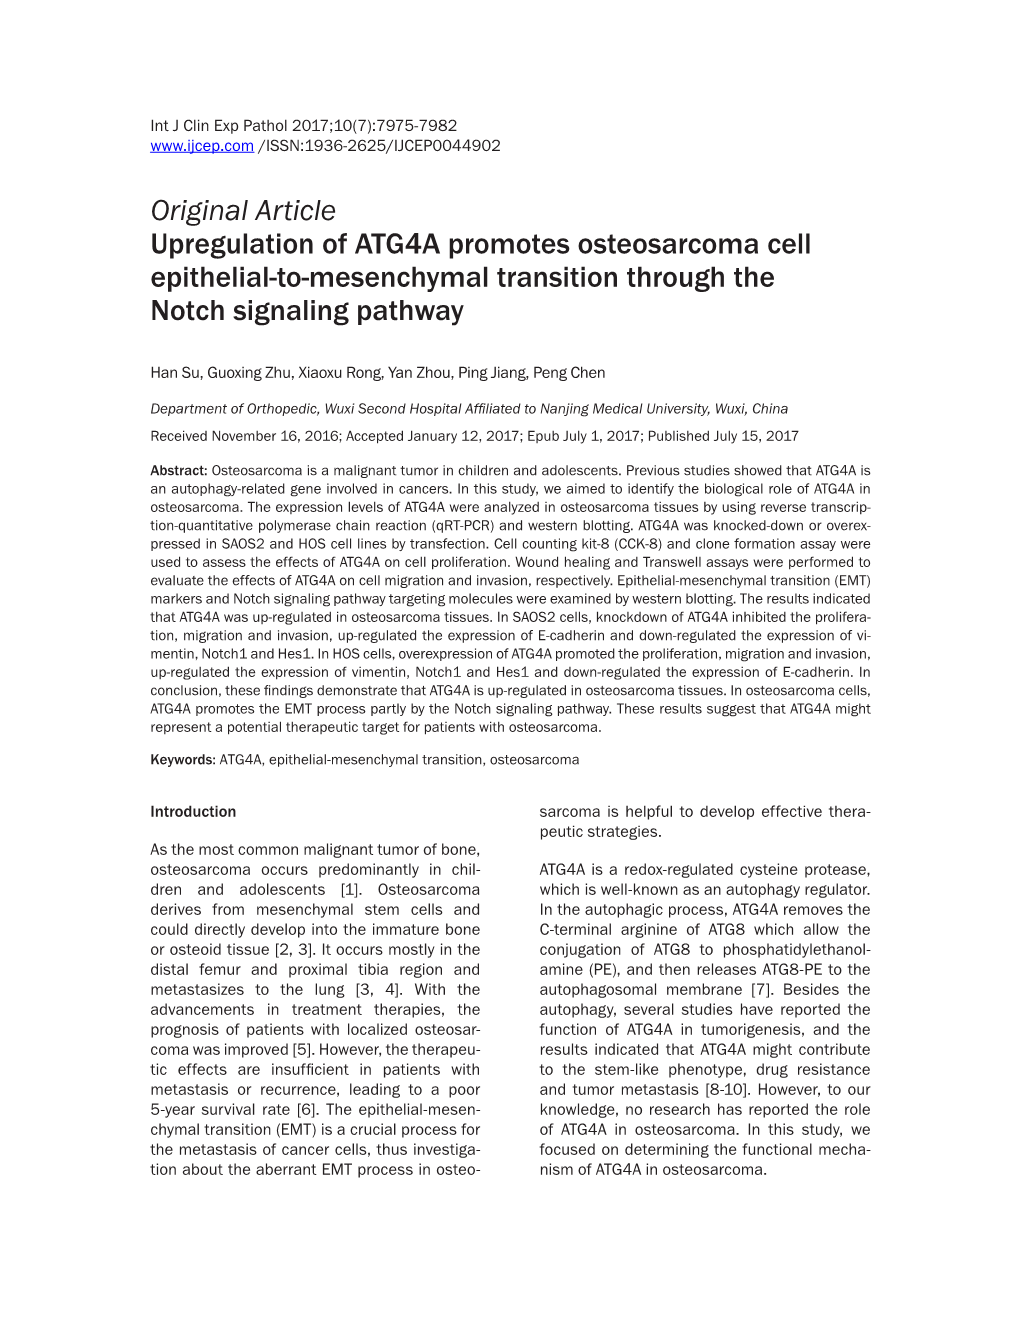 Original Article Upregulation of ATG4A Promotes Osteosarcoma Cell Epithelial-To-Mesenchymal Transition Through the Notch Signaling Pathway